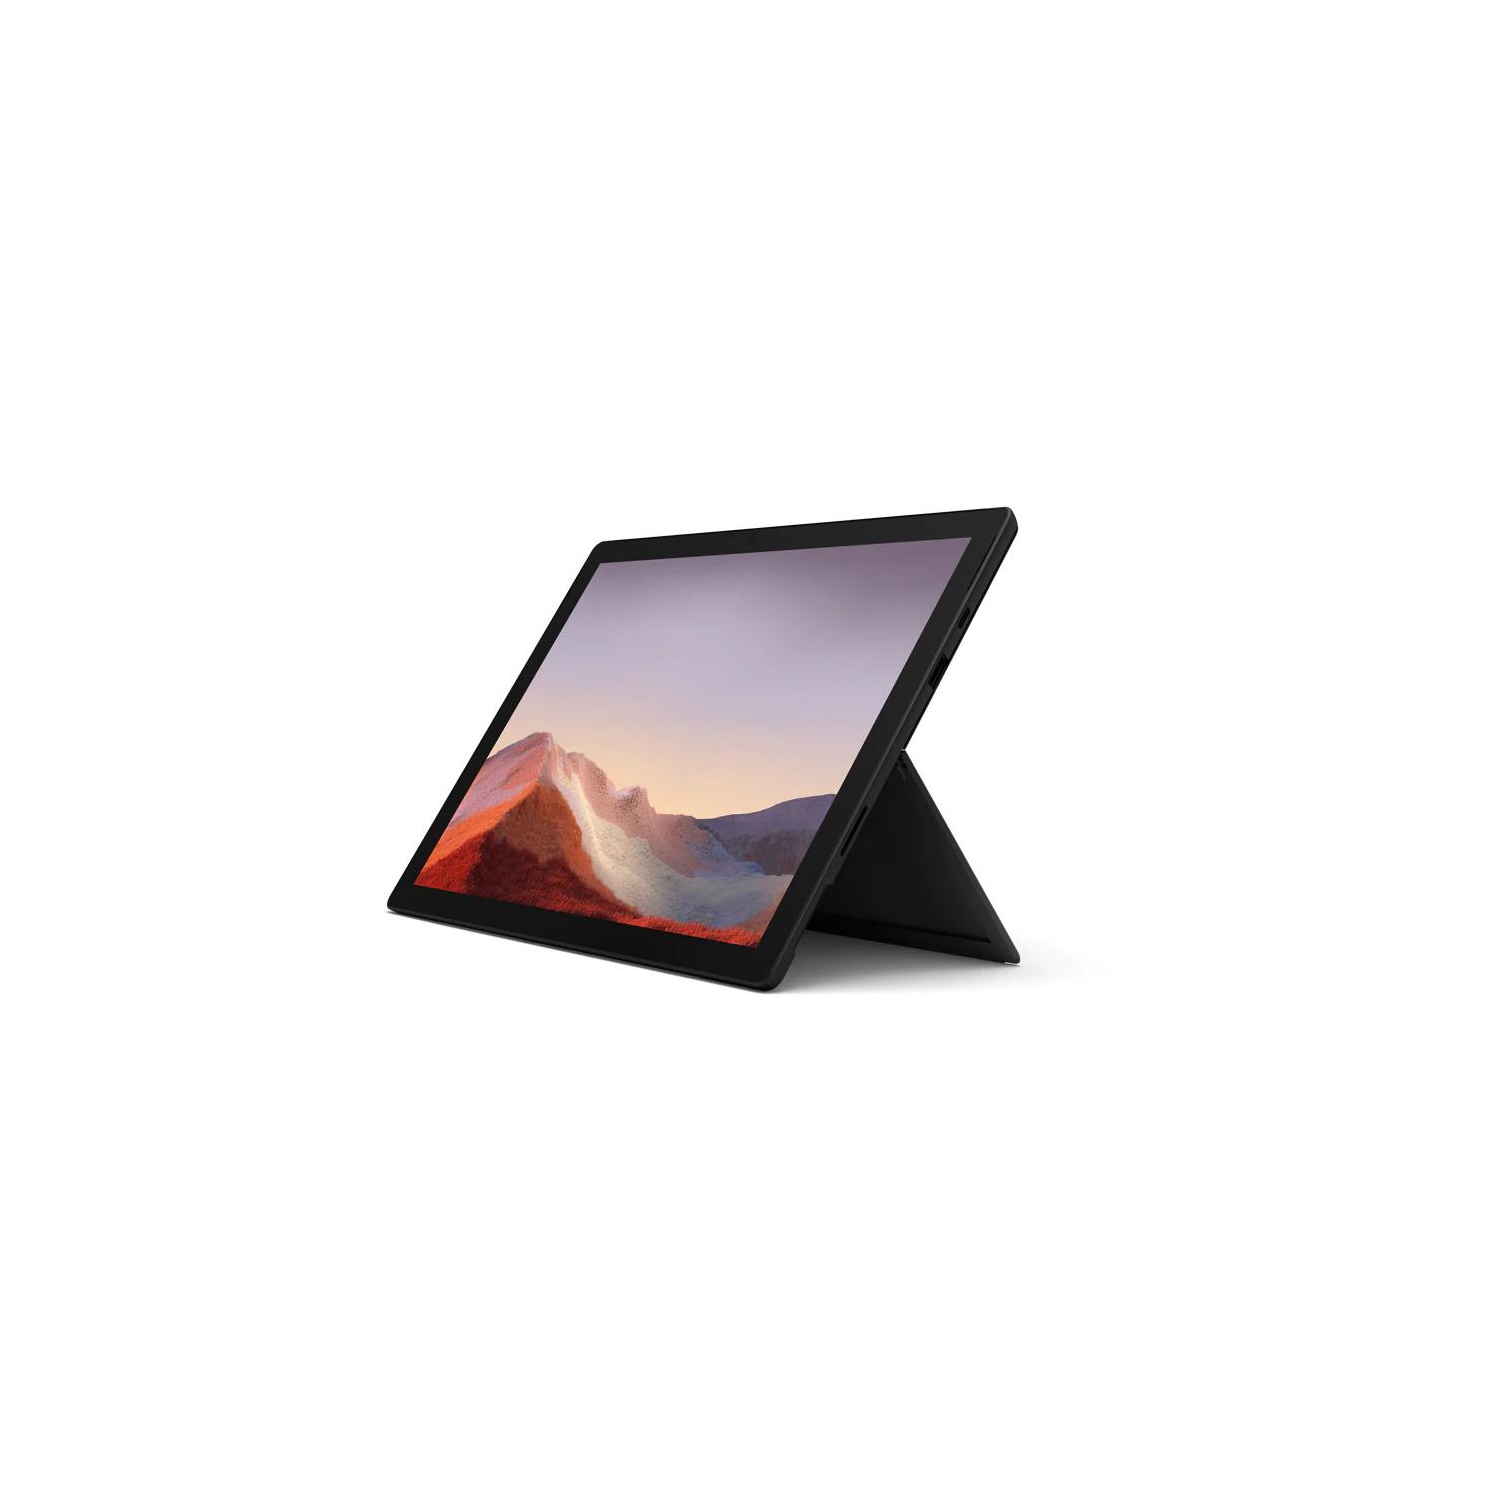 Refurbished (Excellent) - Microsoft Surface Pro 7 12.3" Tablet (Intel i5/8 GB RAM/256 GB/Win 10 Home) - Manufacturer Factory Recertified (1-Year Microsoft Warranty) - Matte Black